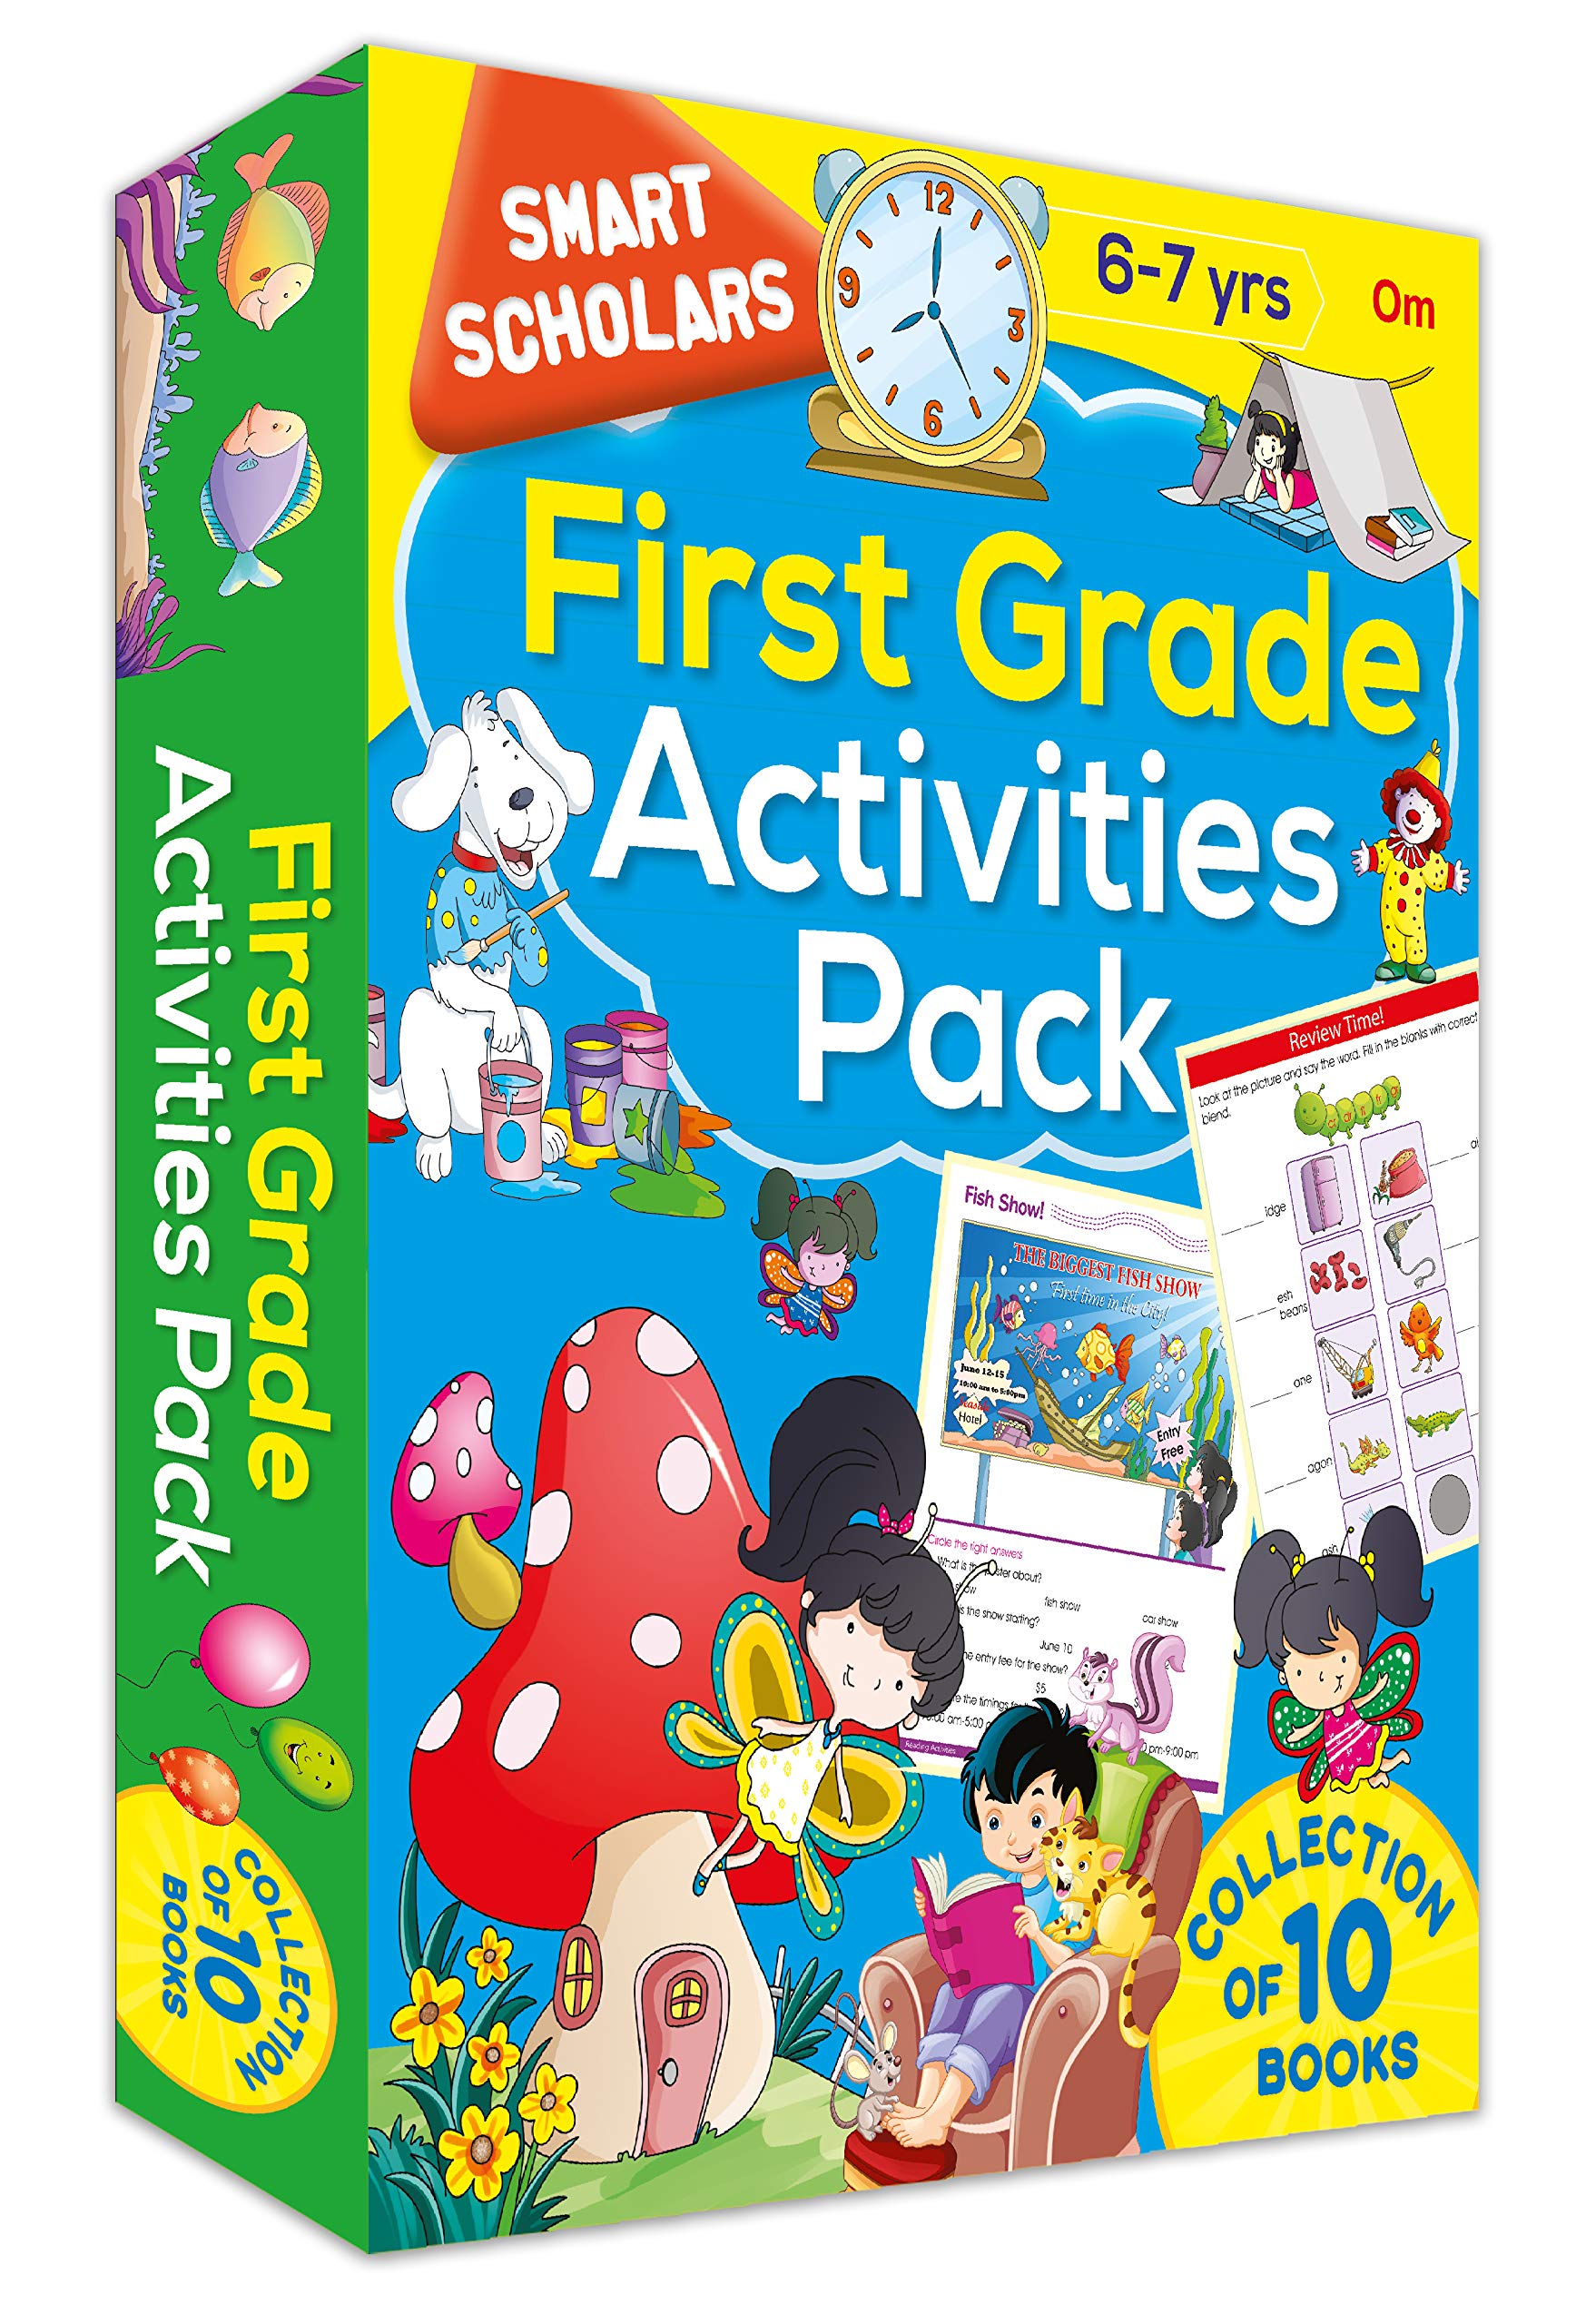 First Grade Activities Pack ( Collection of 10 books) (পেপারব্যাক)